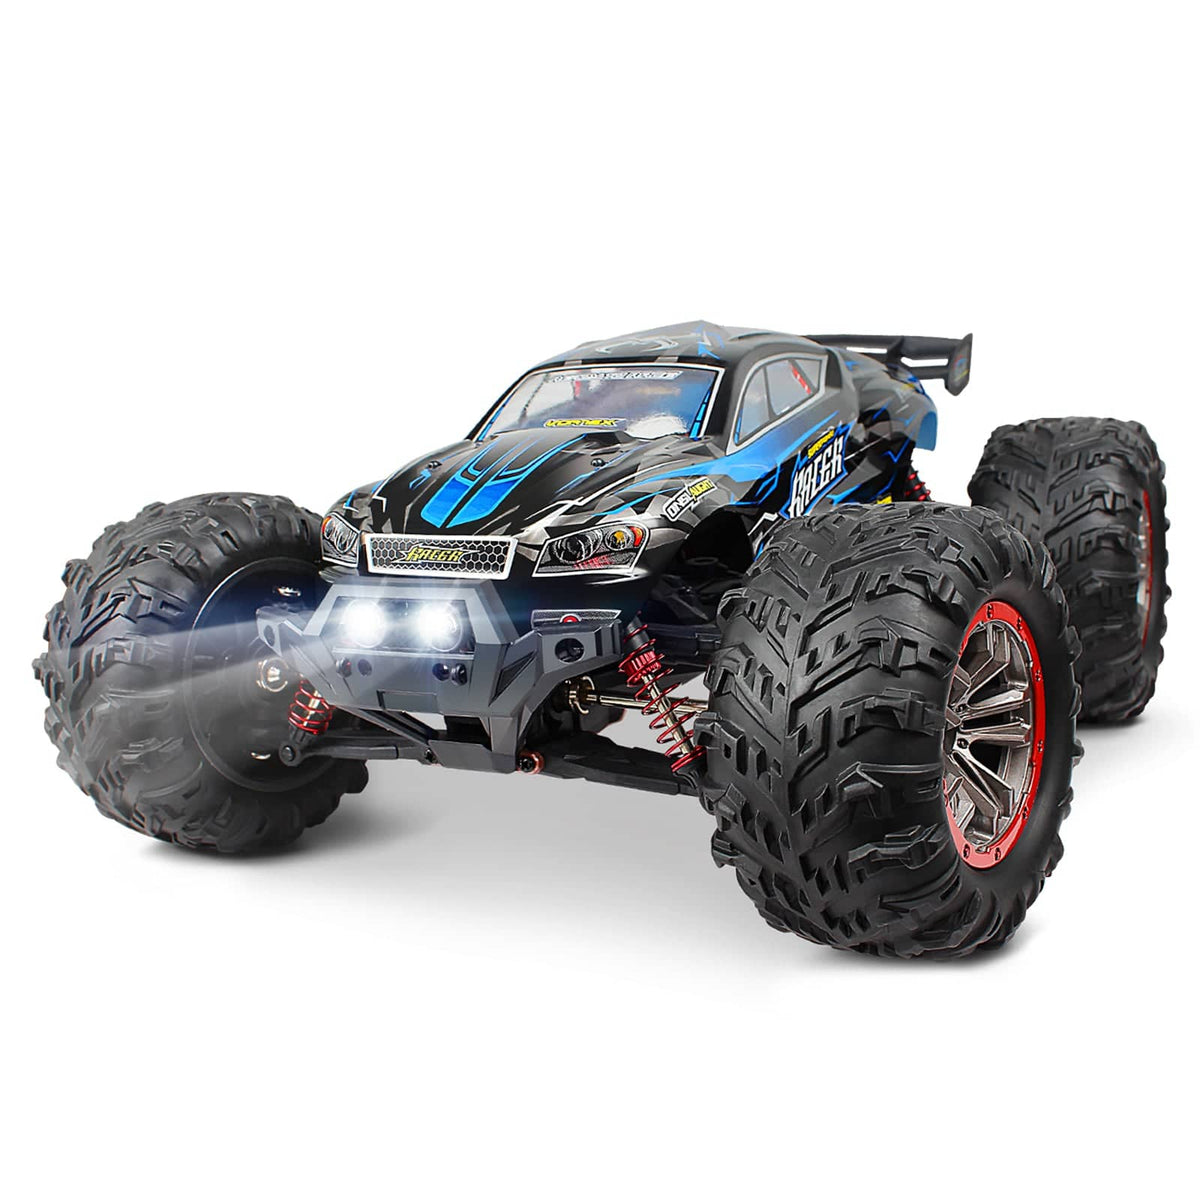 Hosim 1:12 Scale RC Car Monster Truck 46km+/H 4WD with 2 Batteries 9156 Blue